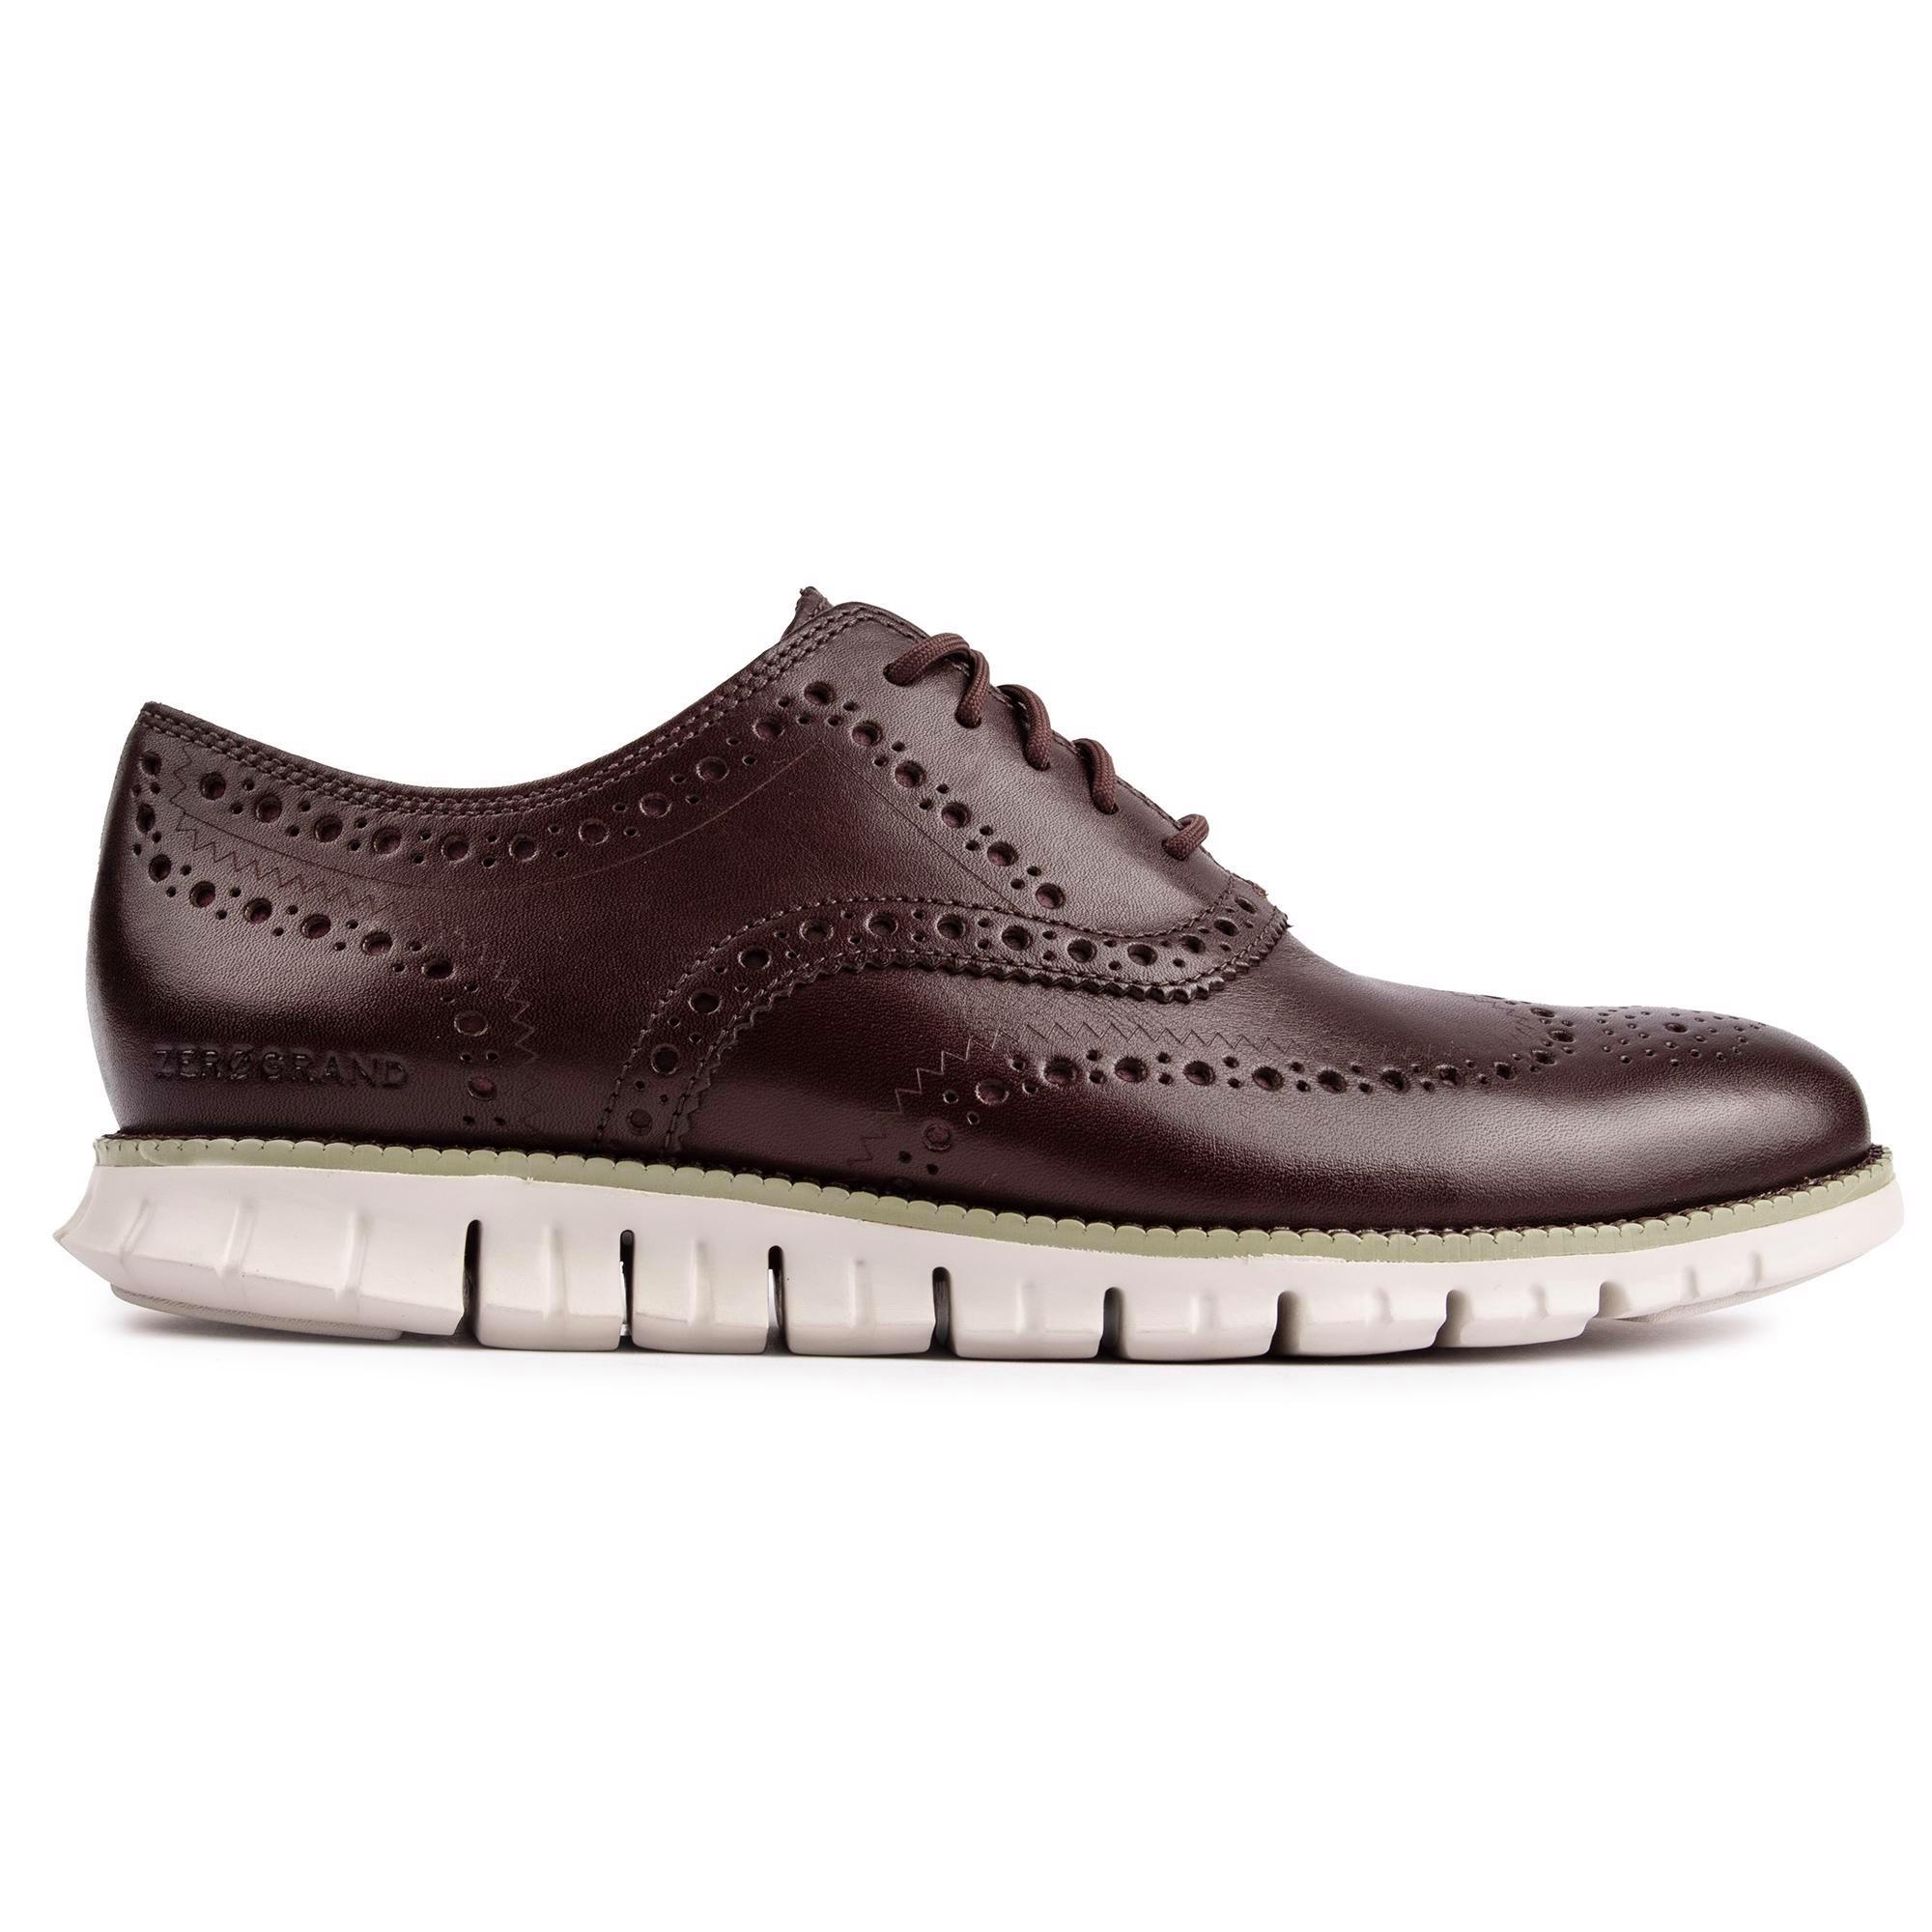 Shoes | Zerogrand Wing Ox Shoes | Cole Haan